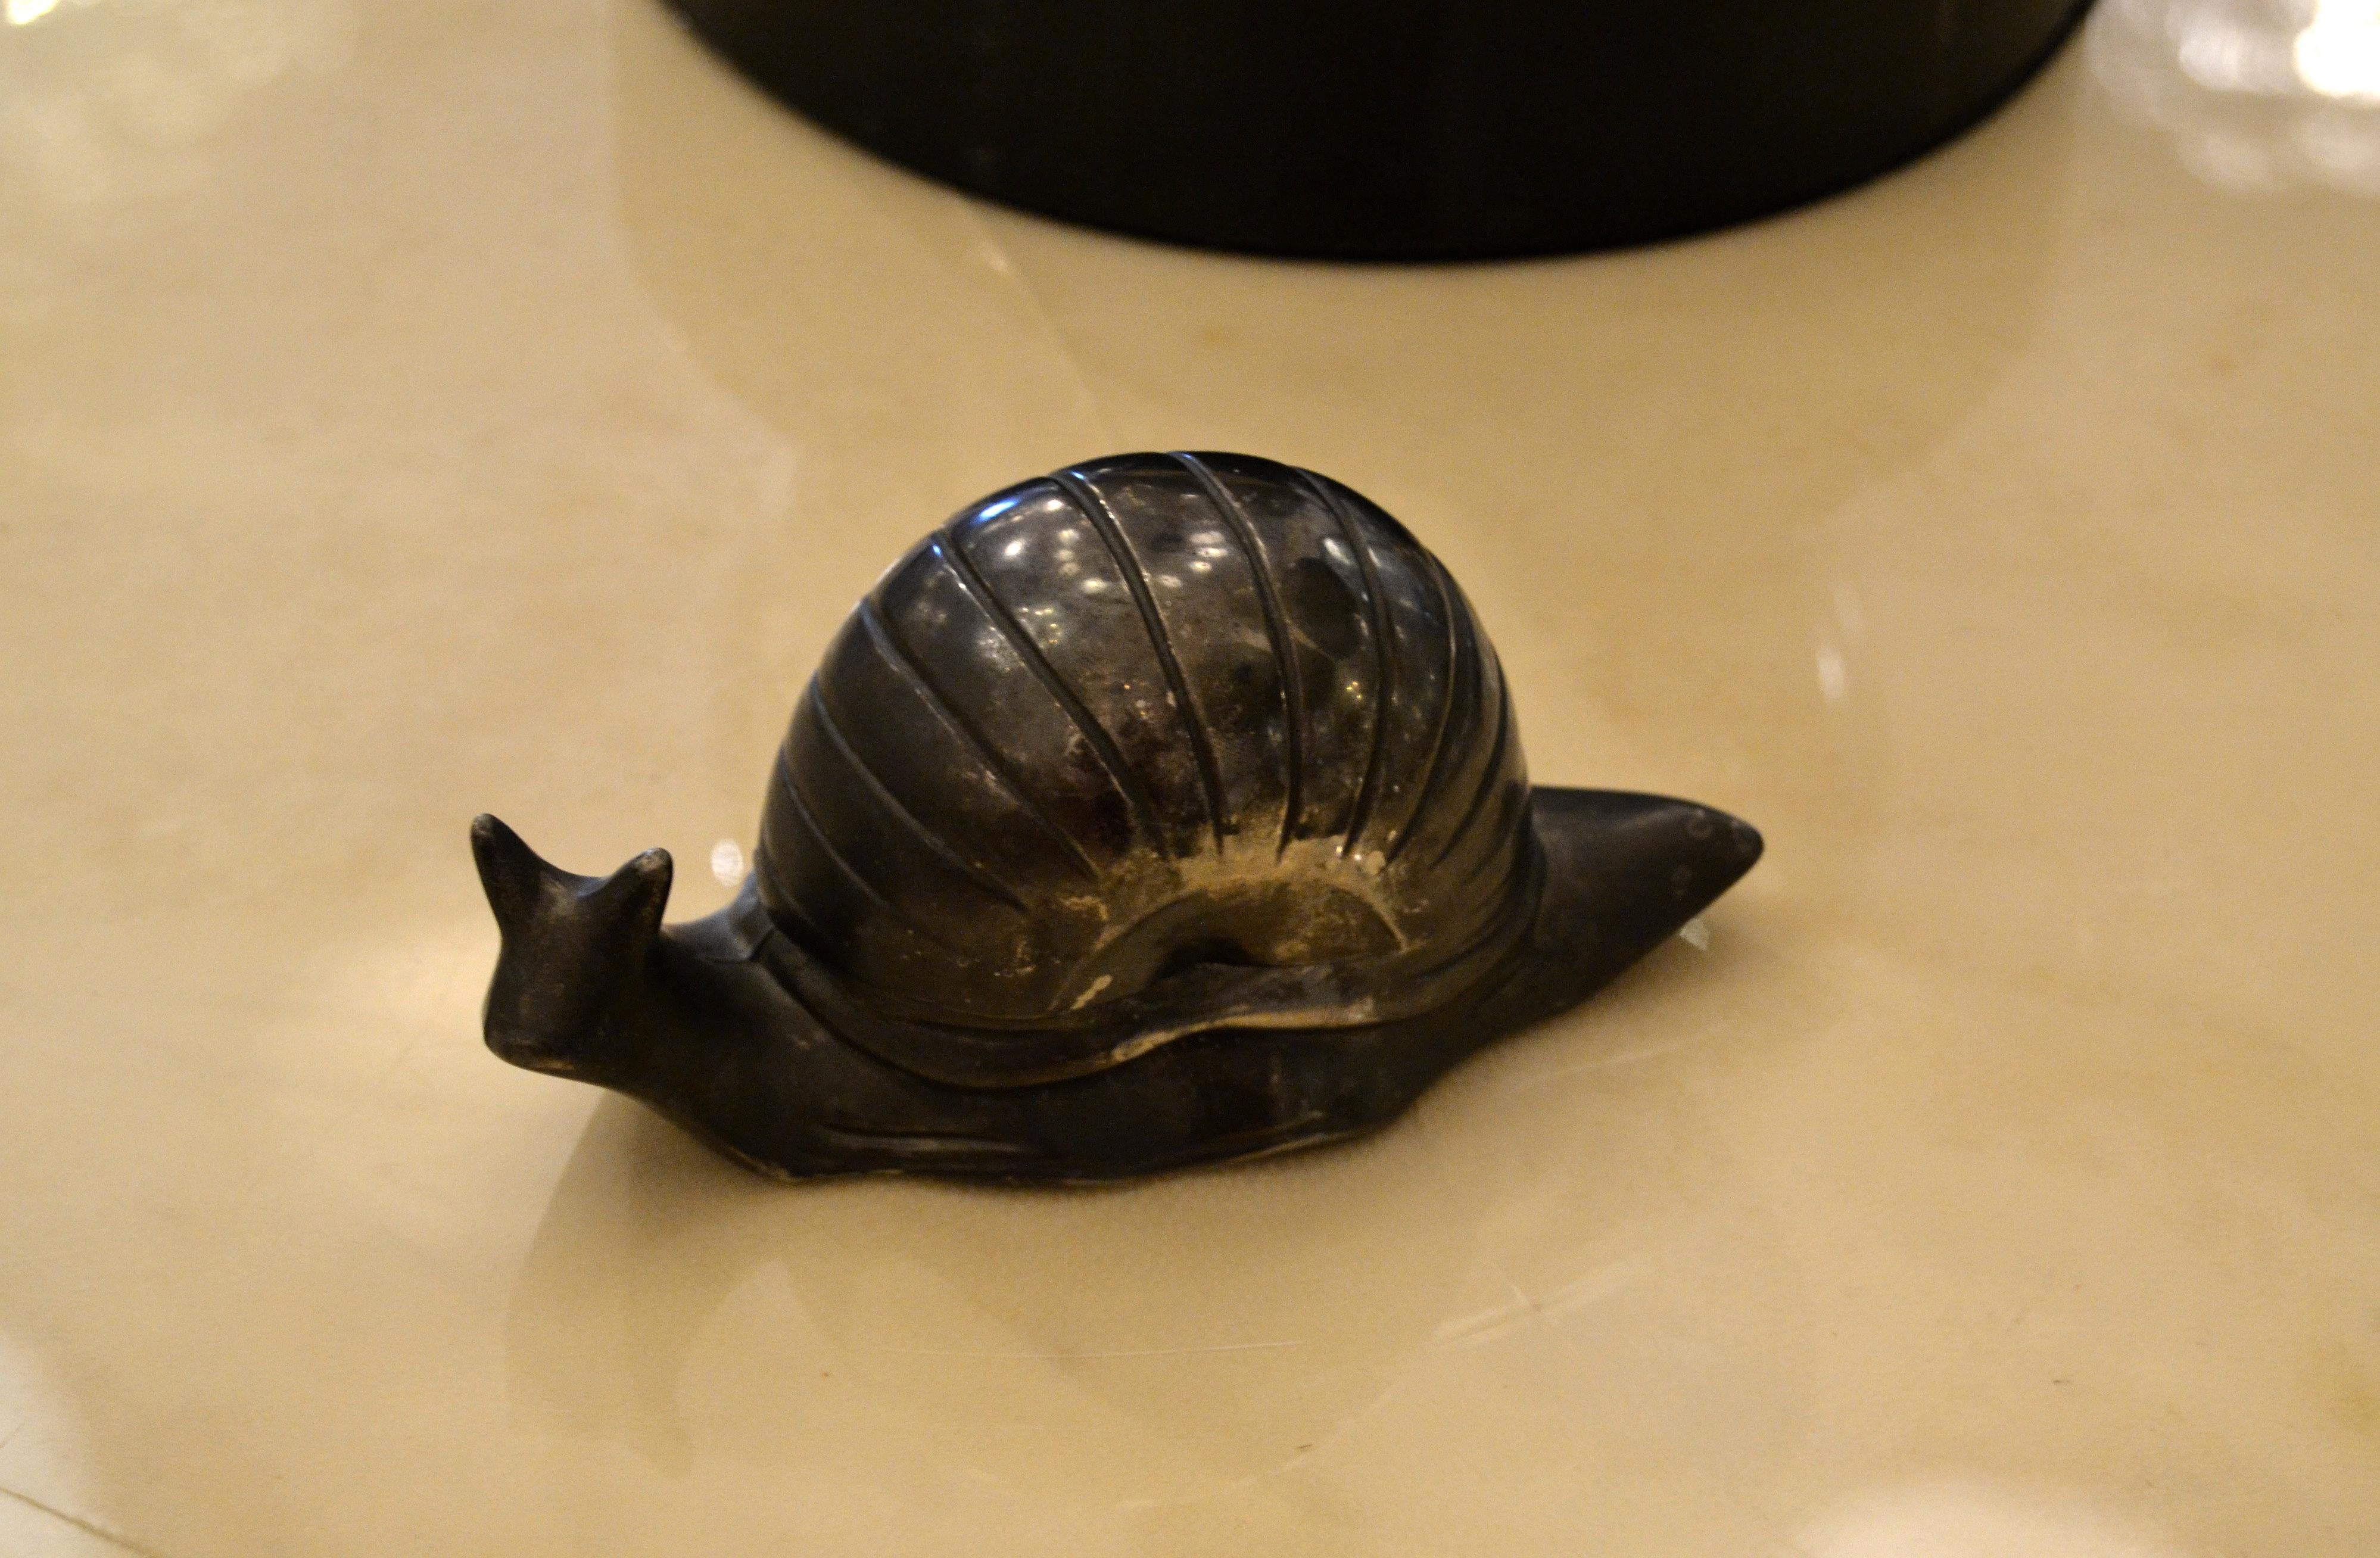 Vintage Silver Plate Snail Salt Dish Spice Dish with Glass Inlay For Sale 2